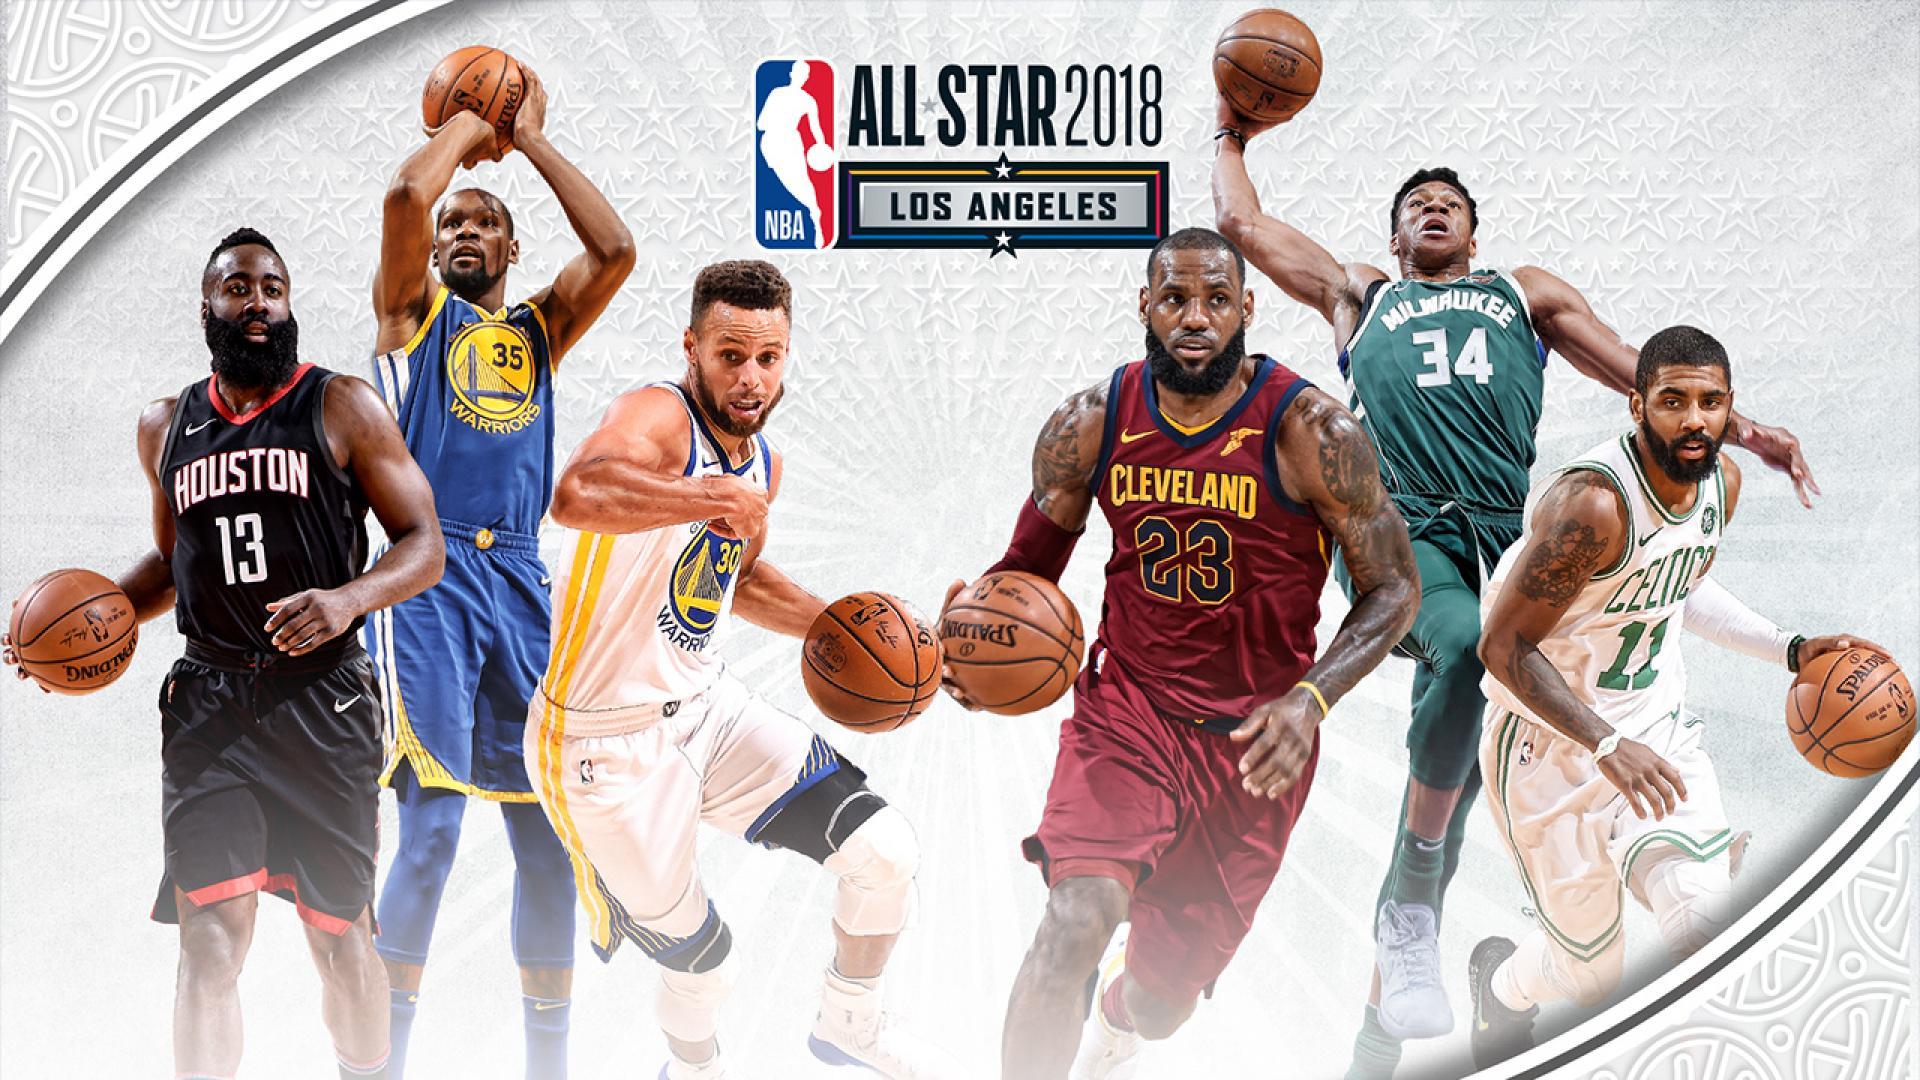 NBA announced the 2018 All Star Game starting fives